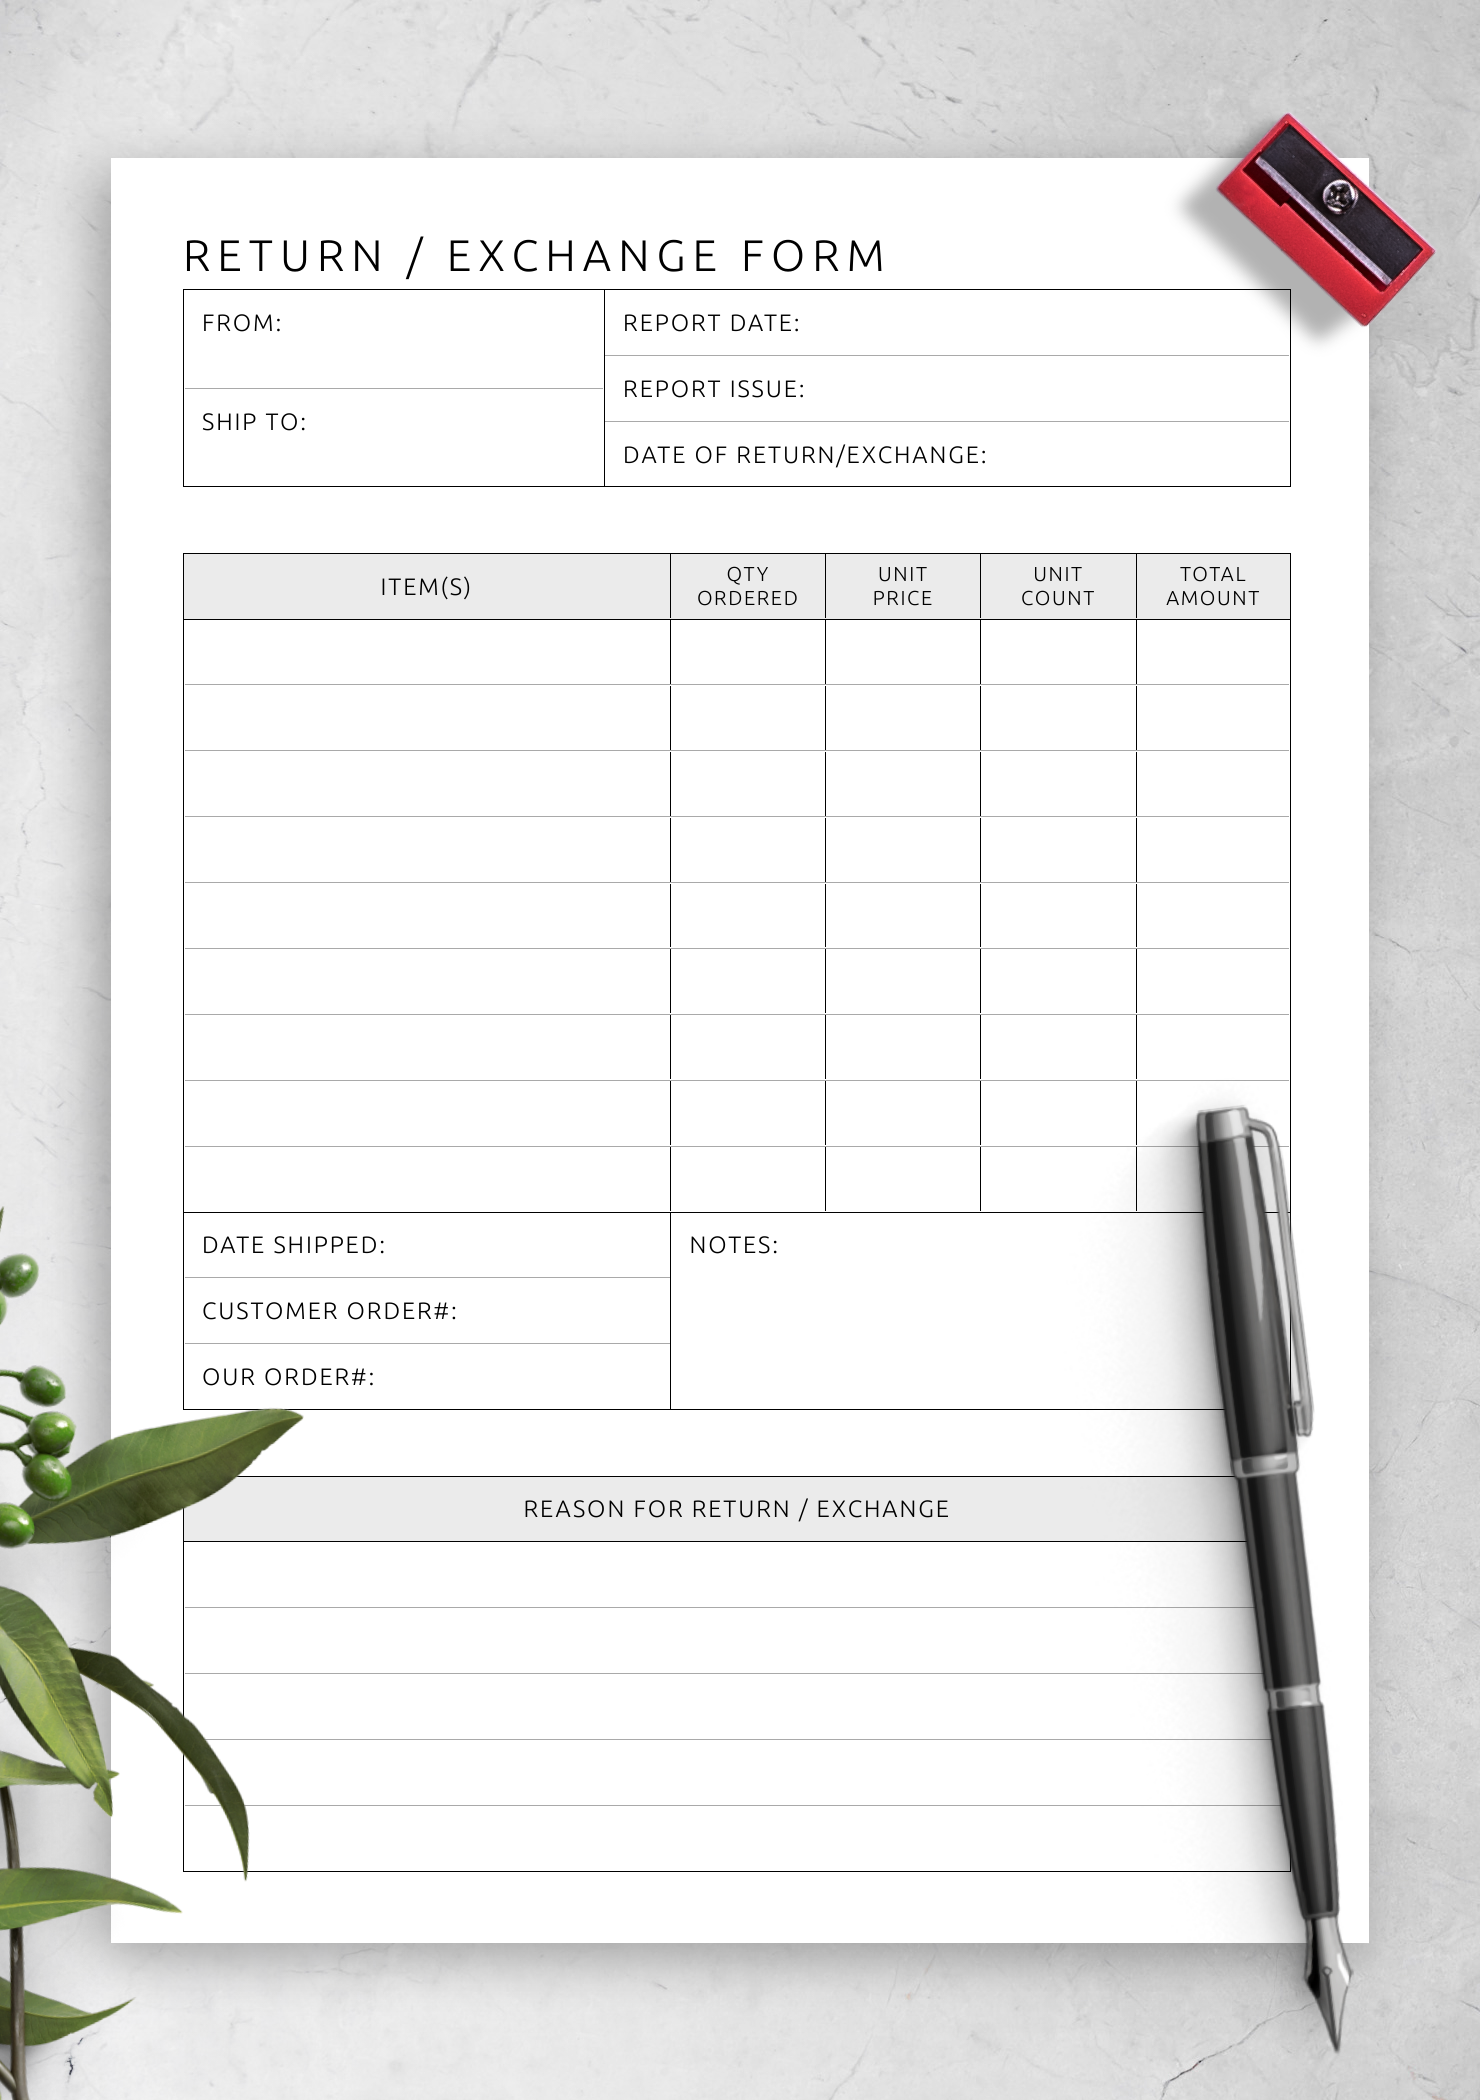 https://onplanners.com/sites/default/files/styles/template_fancy/public/template-images/printable-return-exchange-form-template-template.png